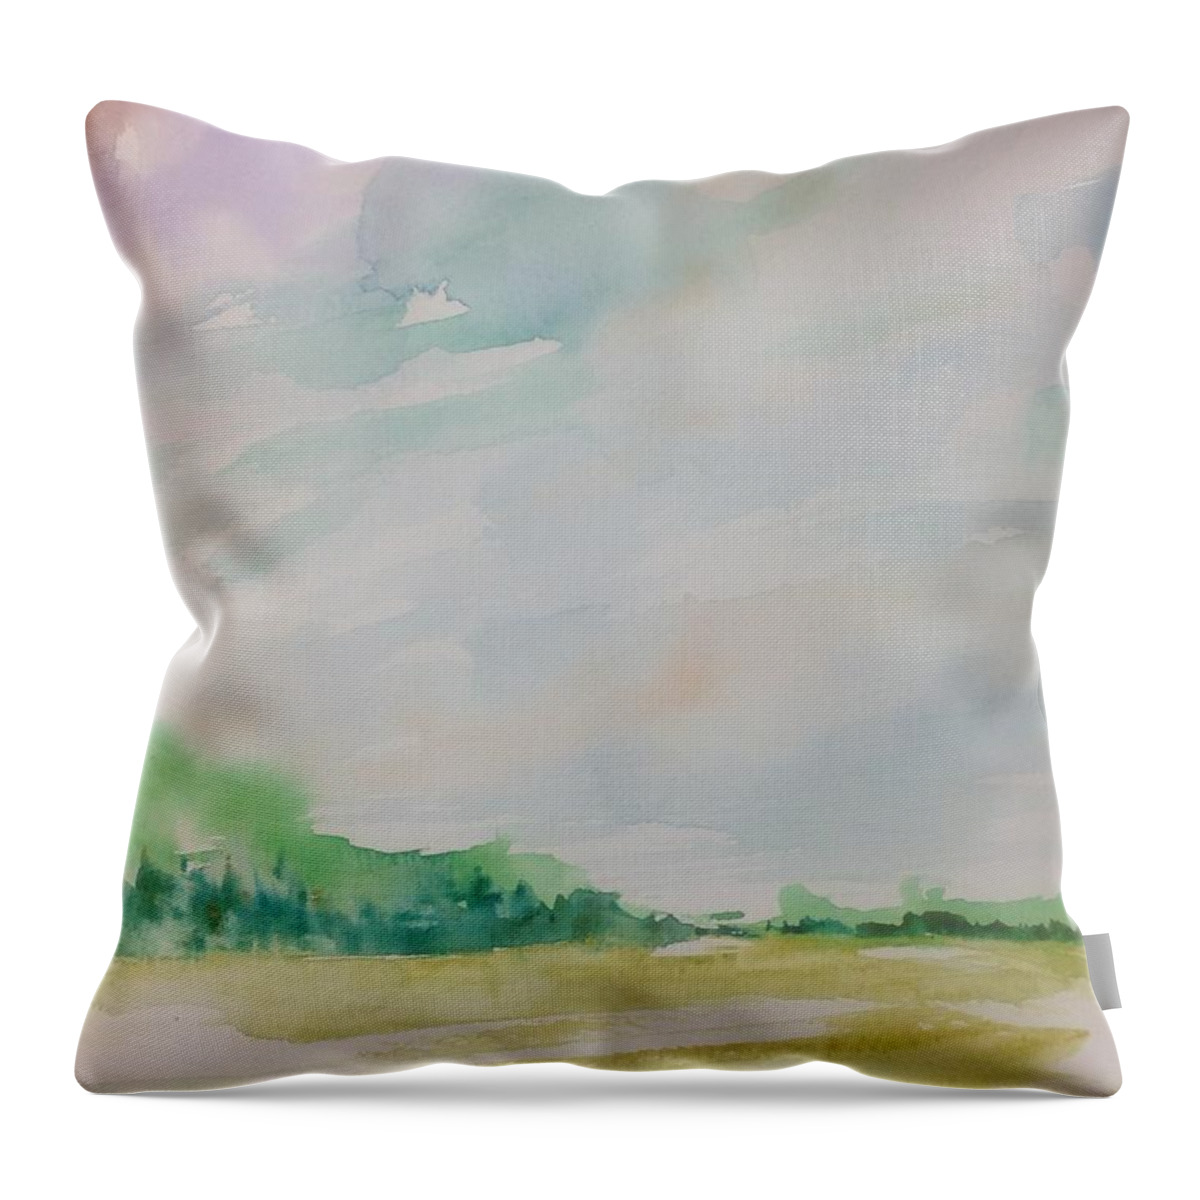 Watercolour Landscape Painting Throw Pillow featuring the painting Soft Summer Wash No.2 by Desmond Raymond